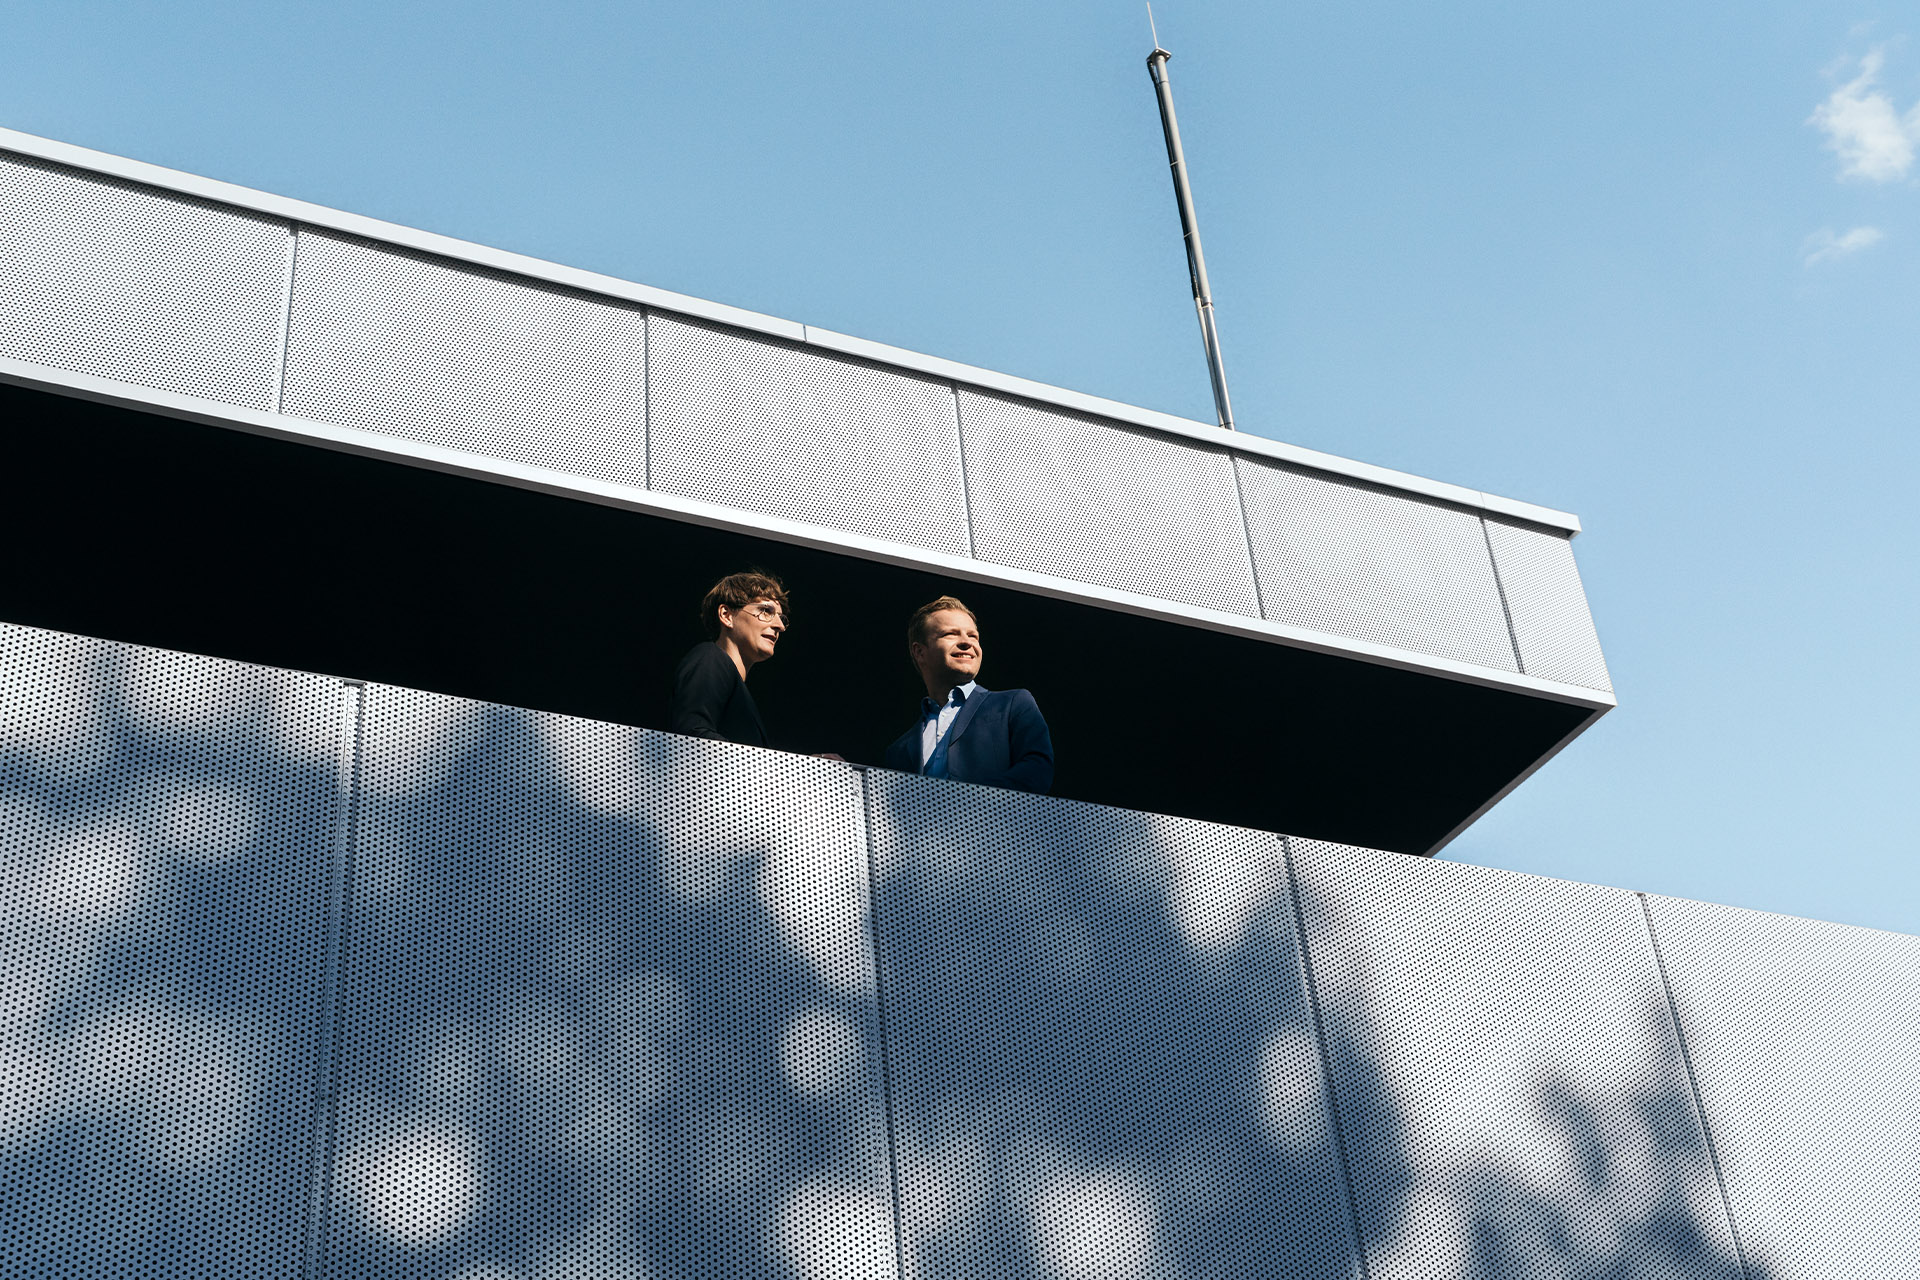 Sustainability experts Dr Johanna Klewitz and Malte Vömel on the balcony of the lounge of the Audi charging hub.